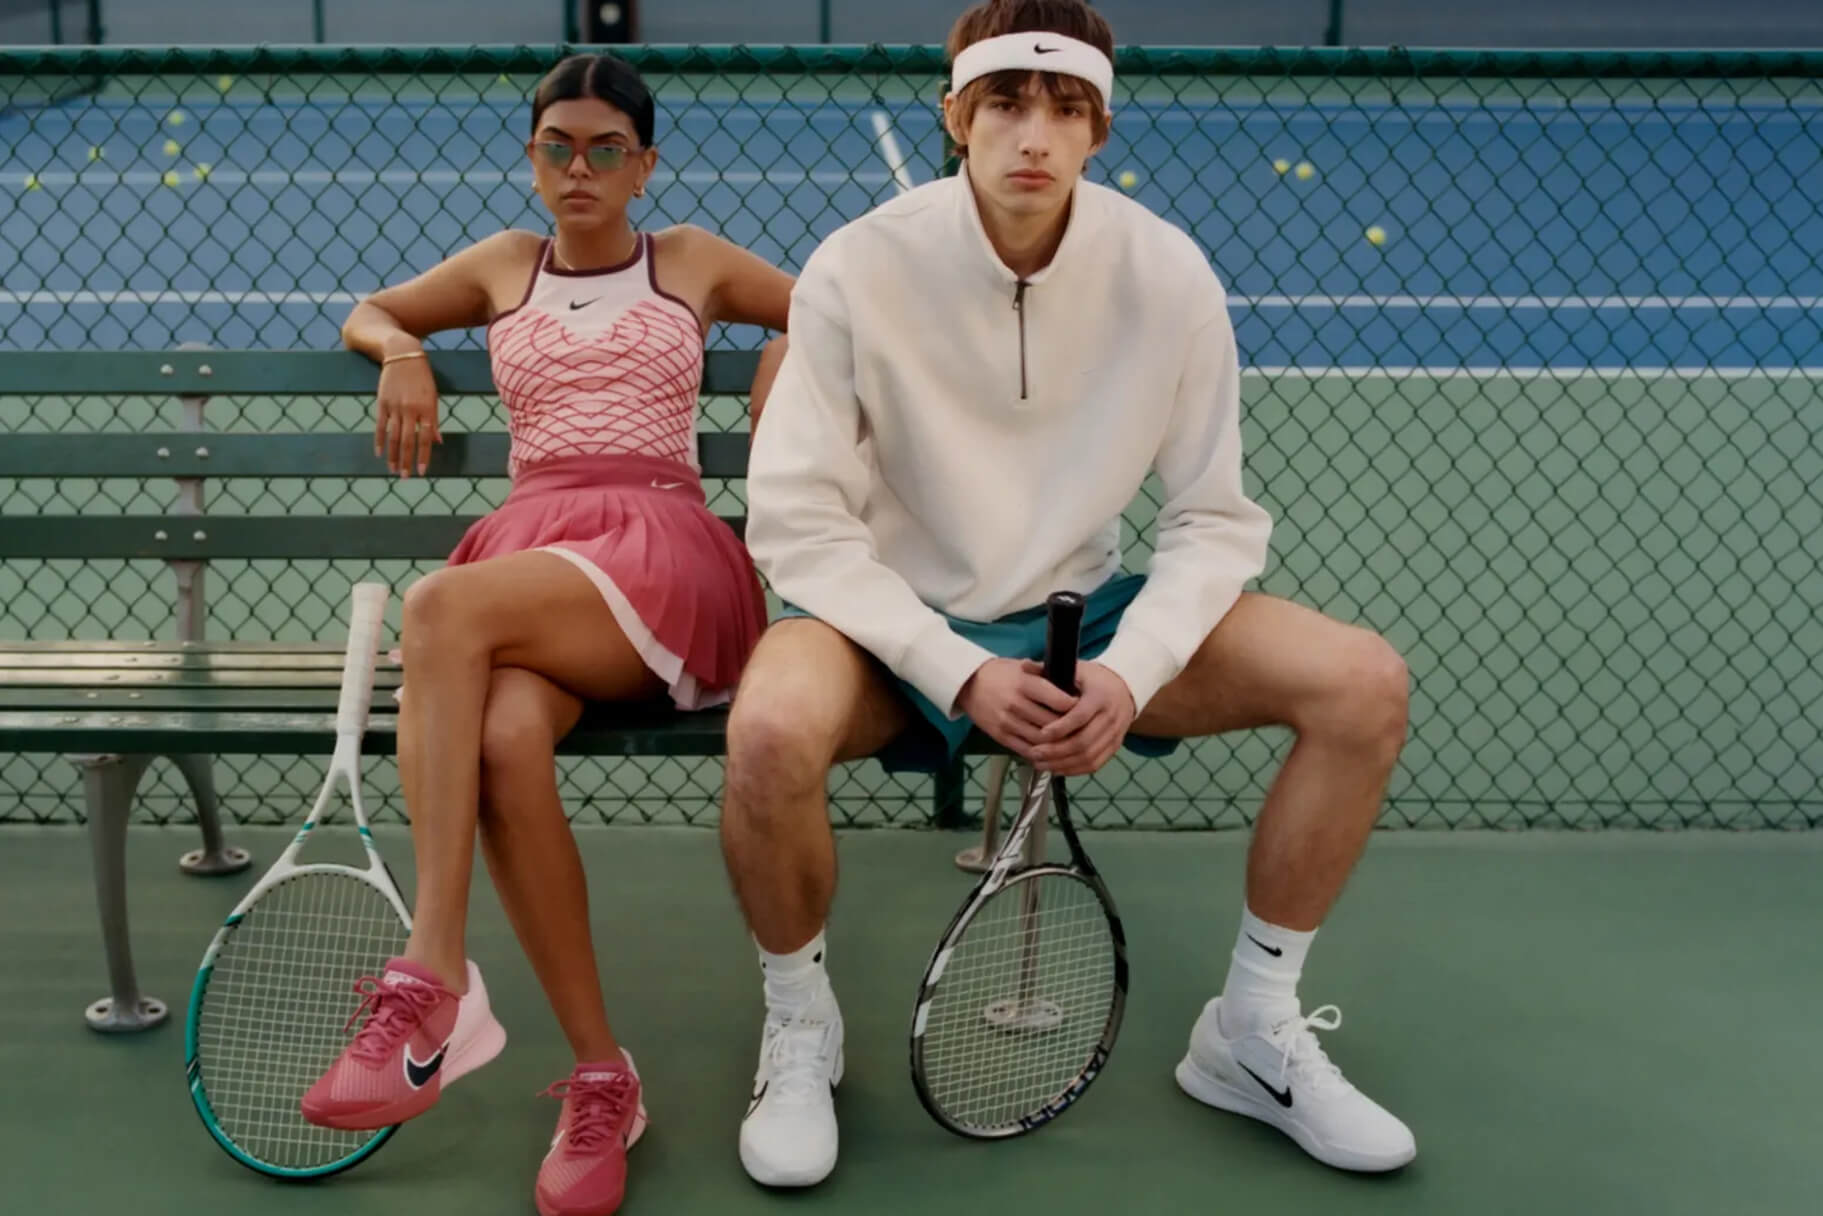 11 Nike gift ideas for tennis players